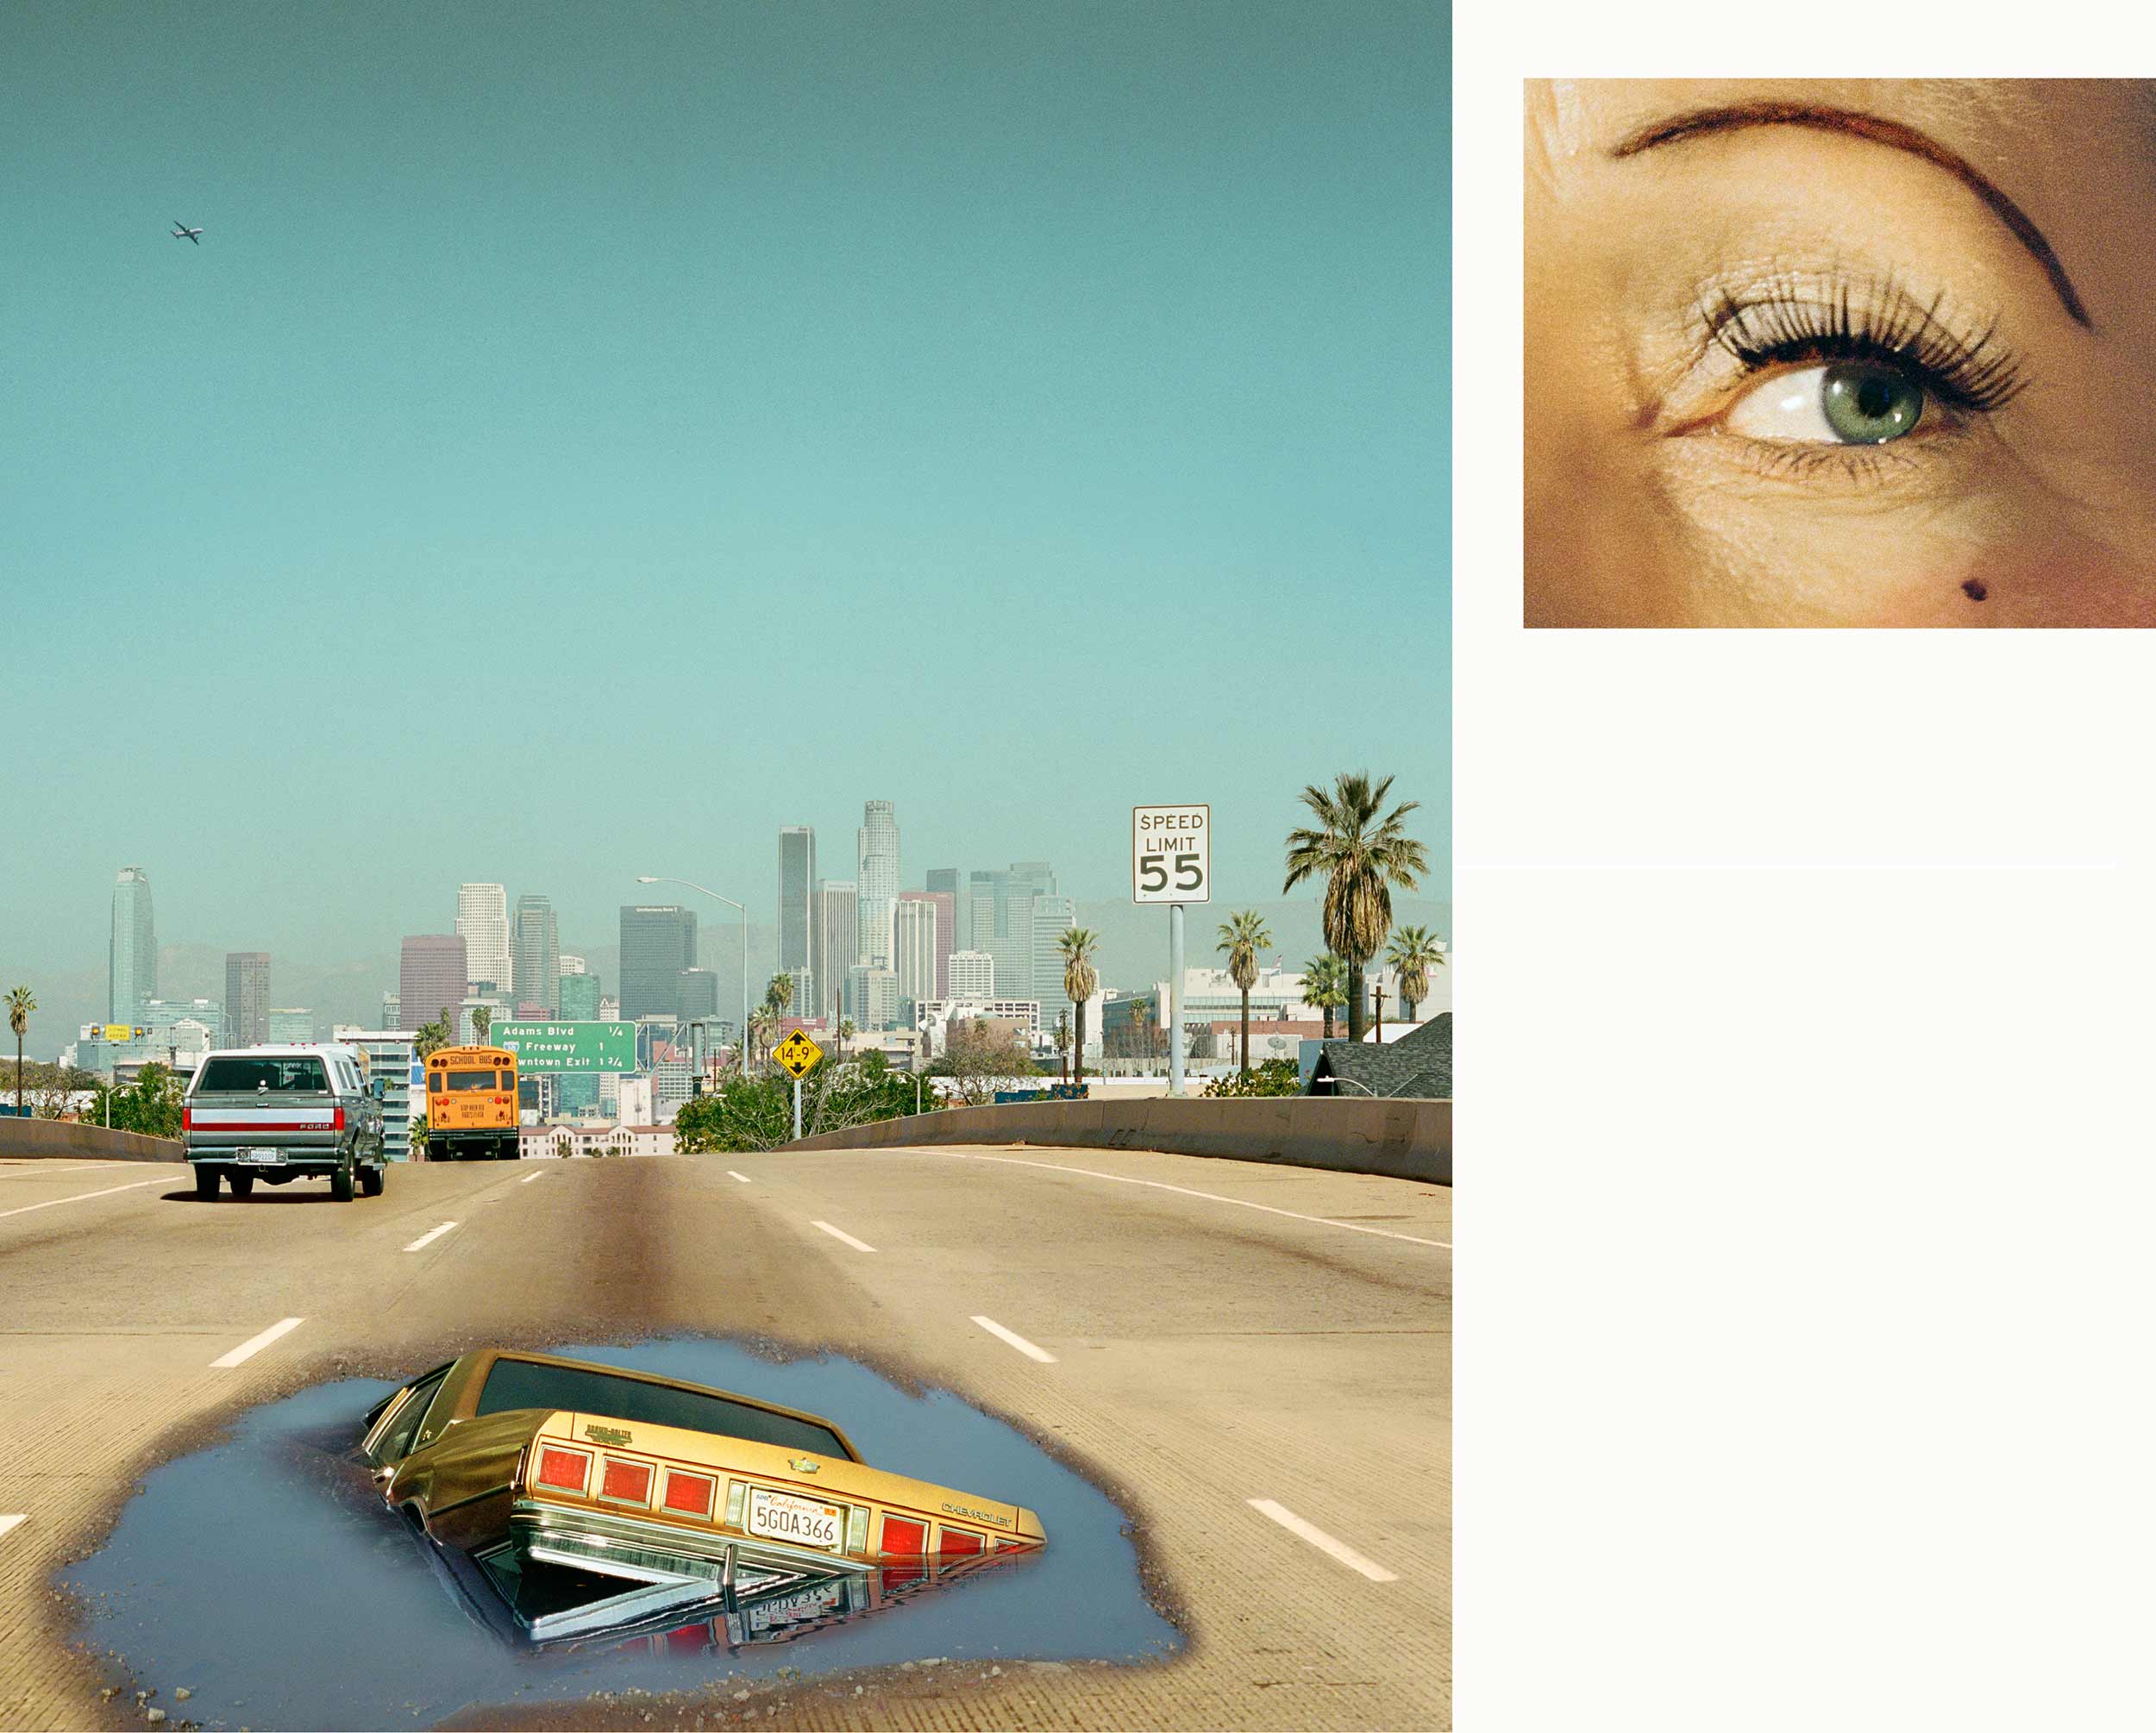   Compulsion   2:00 PM, Interstate 110 and Eye #6 (Sinkhole) (Diptych),  2012 Scene: 59 x 51.5 inches, Eye: 20 x 23 inches 